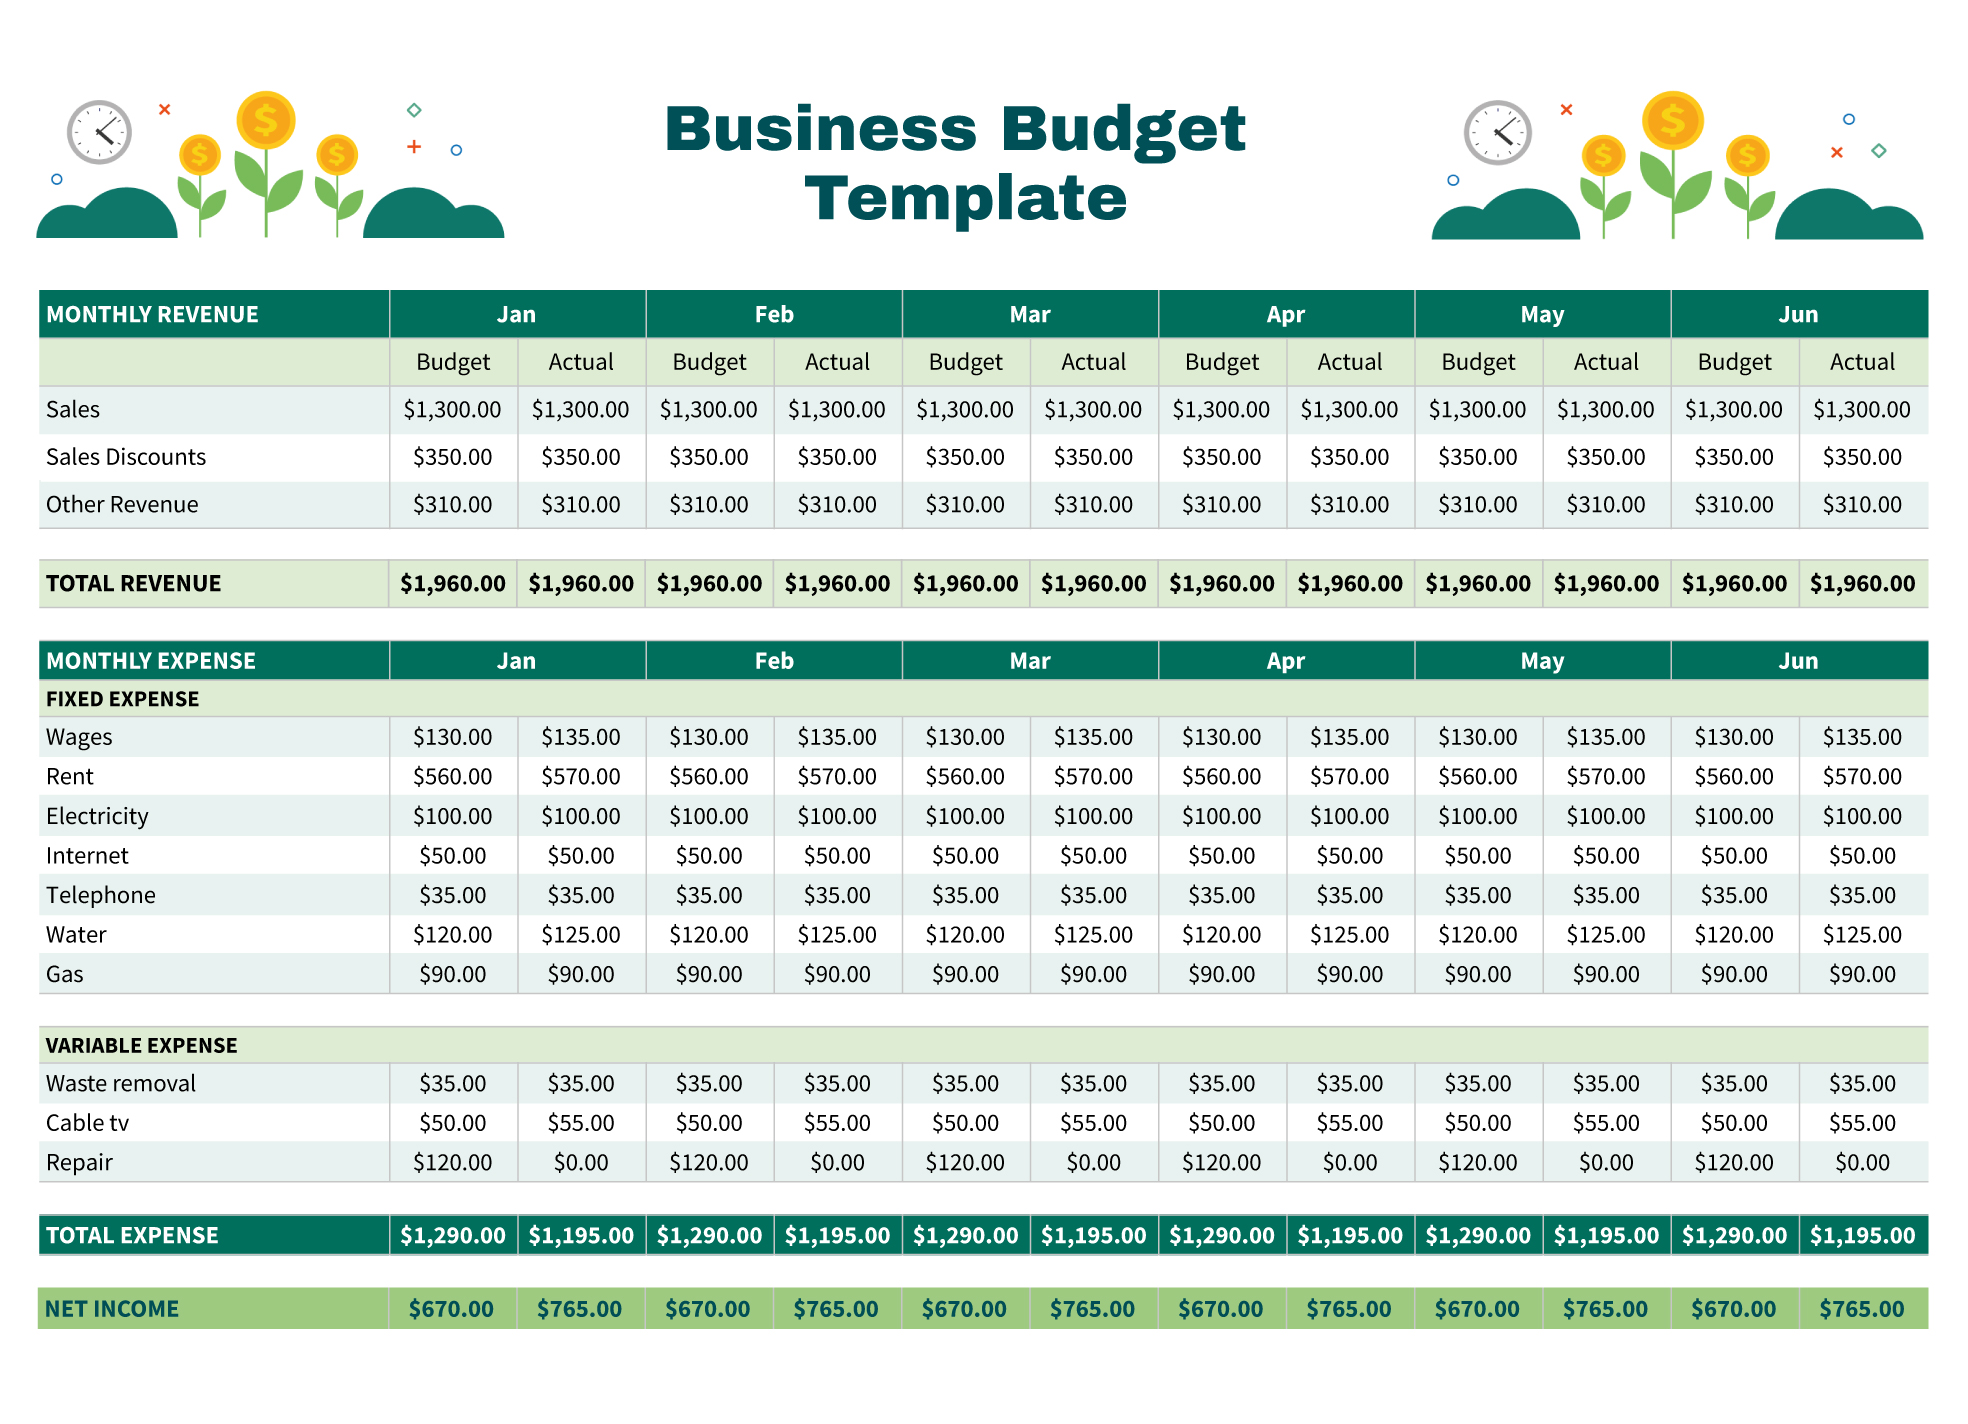 excel template for budget